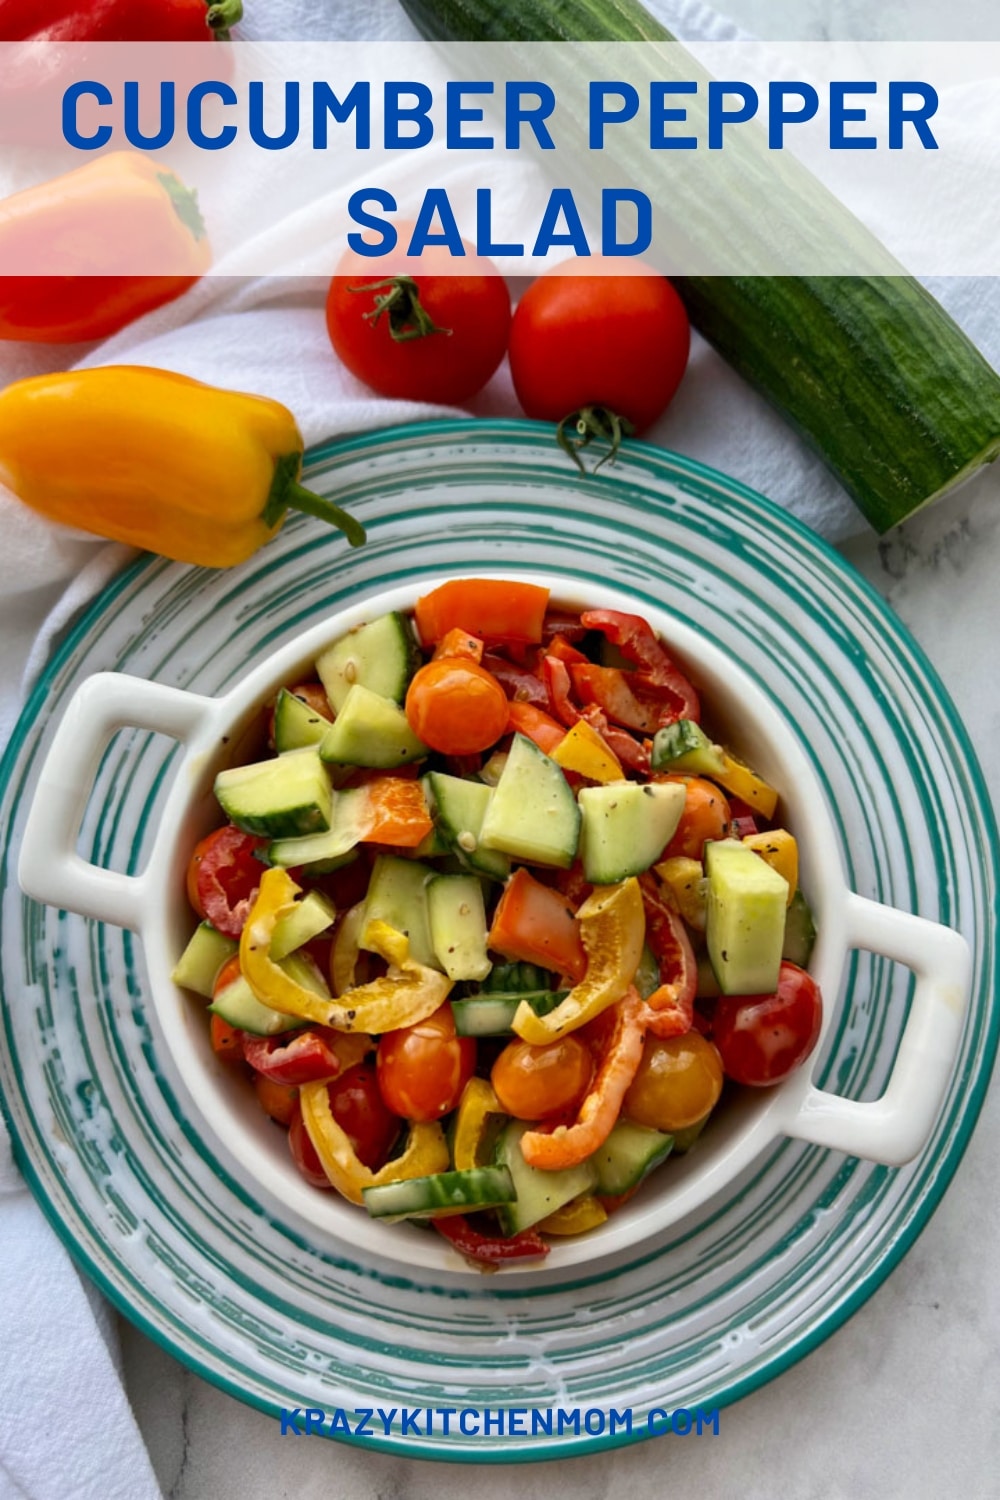 Cucumber Pepper Salad is a bright refreshing summer salad that pops with garden fresh vegetables and tangy sesame dressing. via @krazykitchenmom